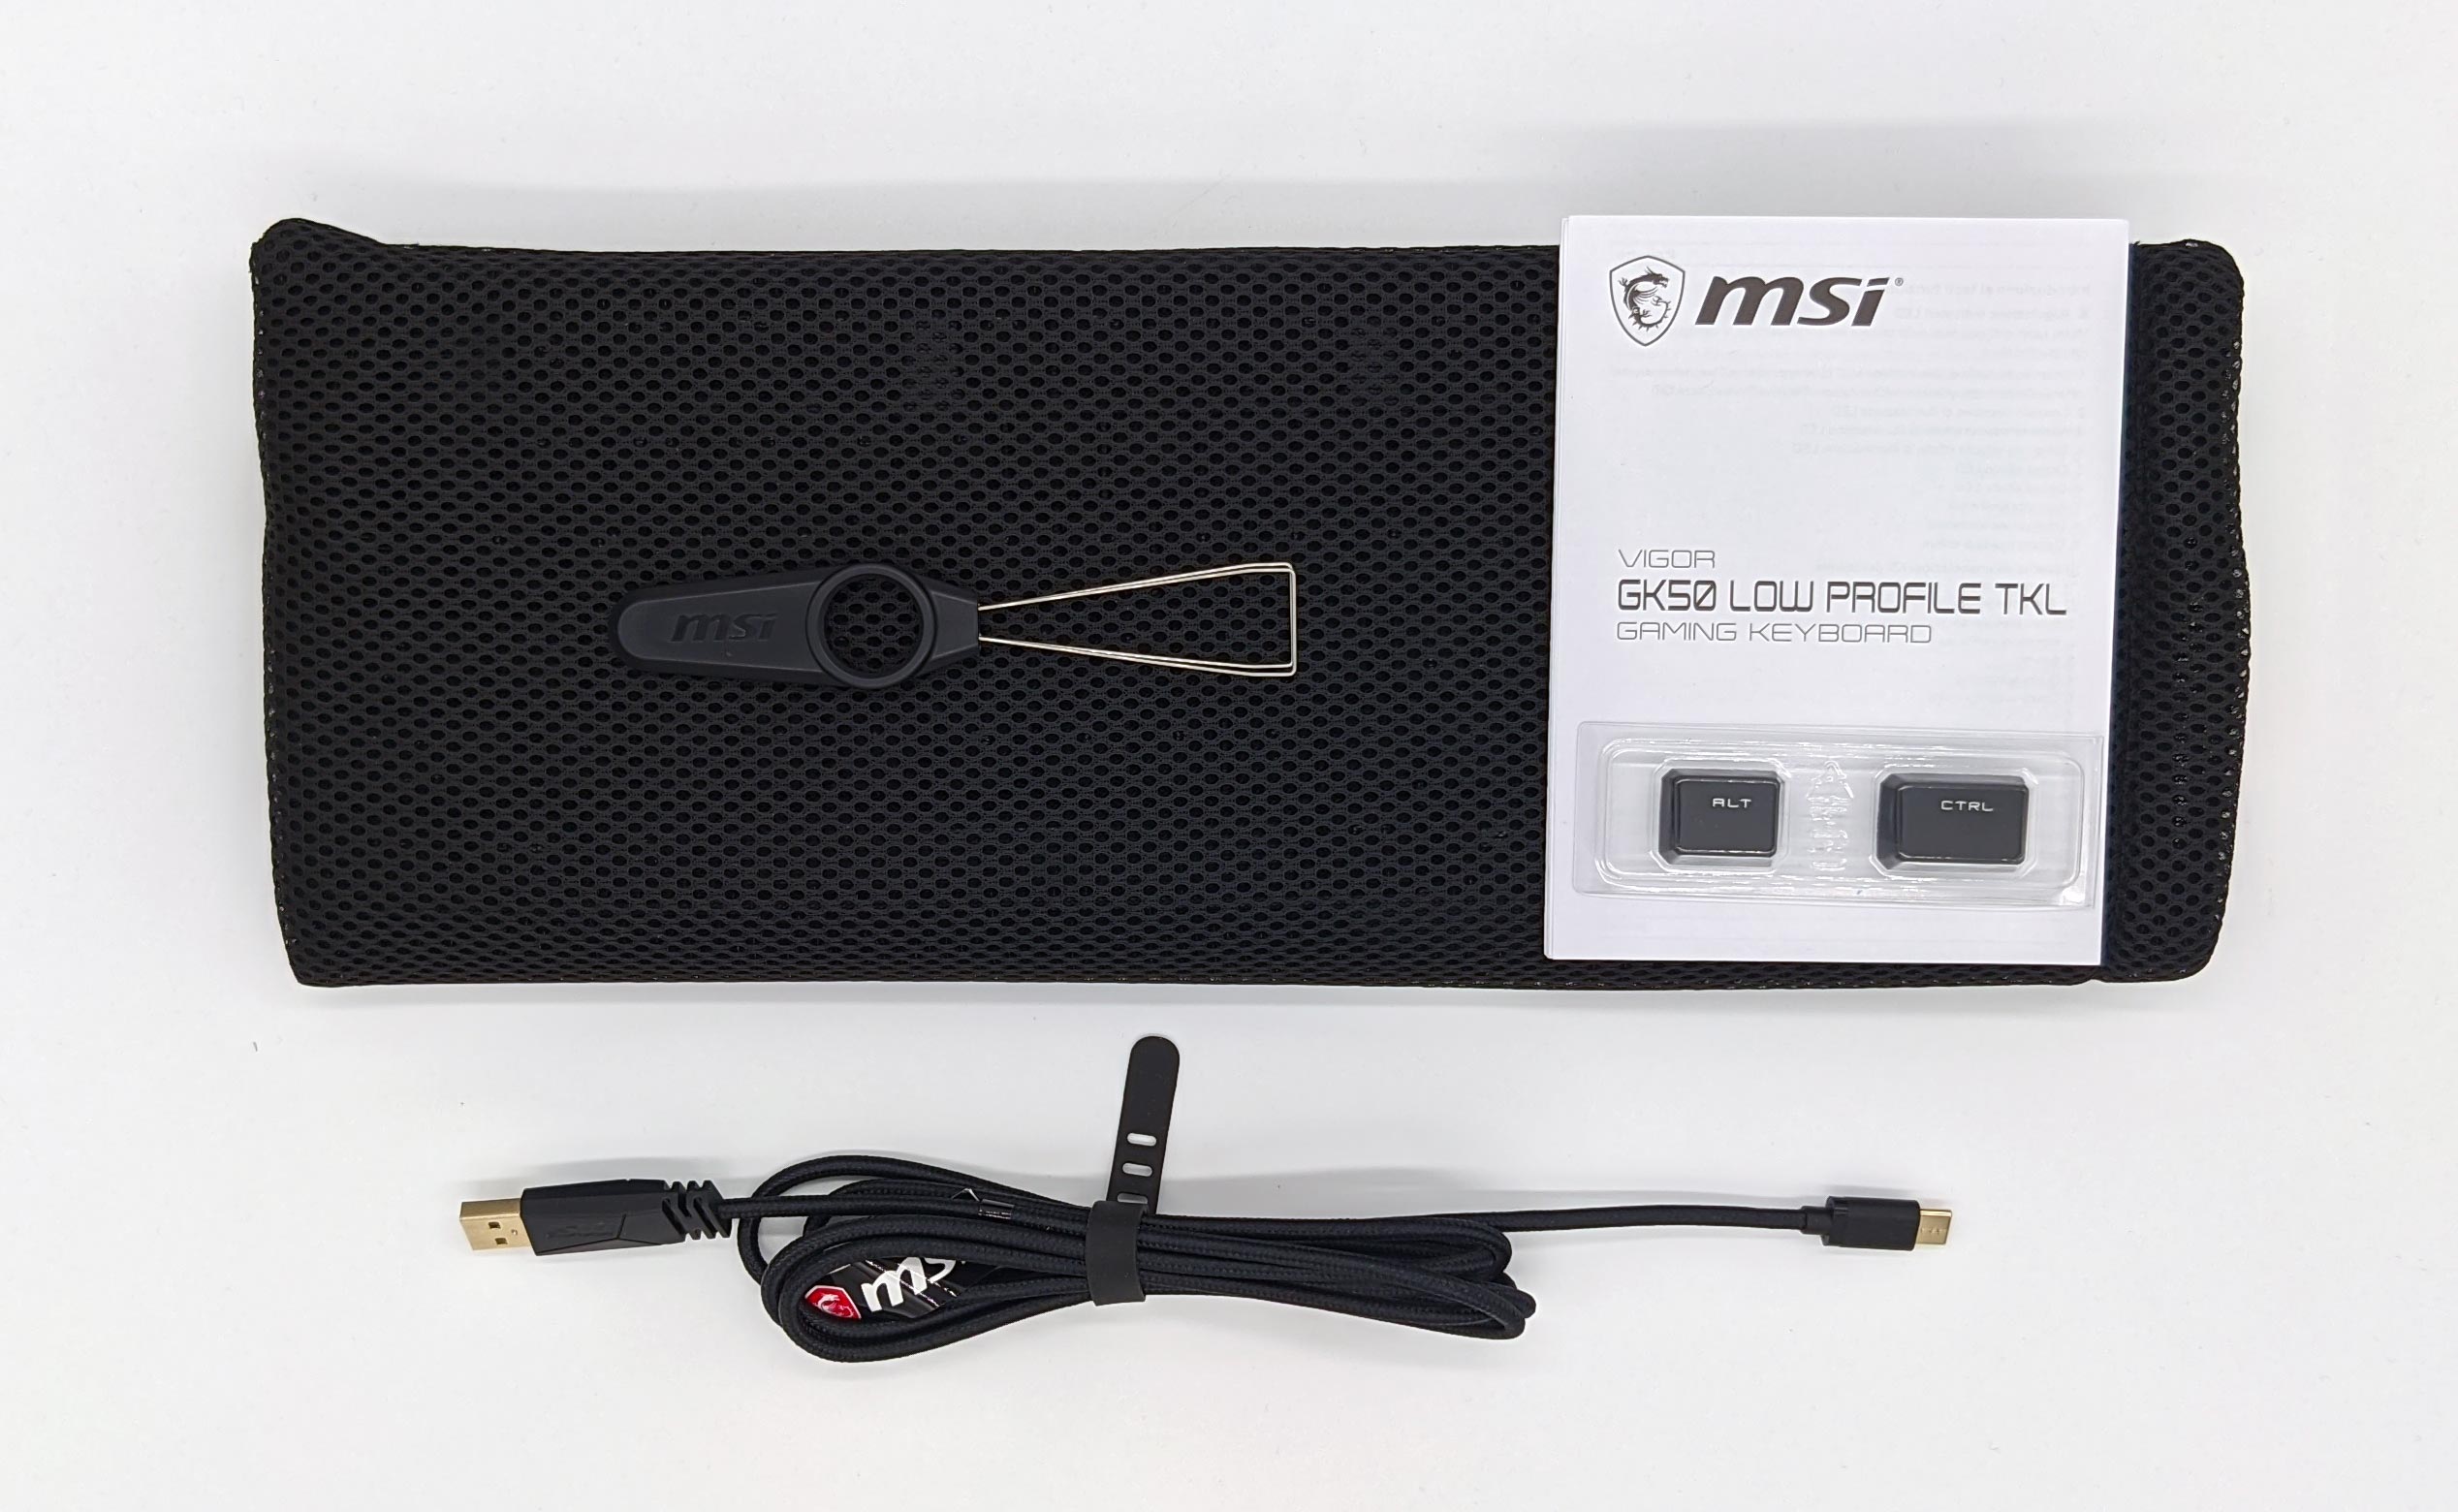 MSI Vigor GK50 Low Profile sound Keyboard flat switches Review | a igor´sLAB special TKL with 